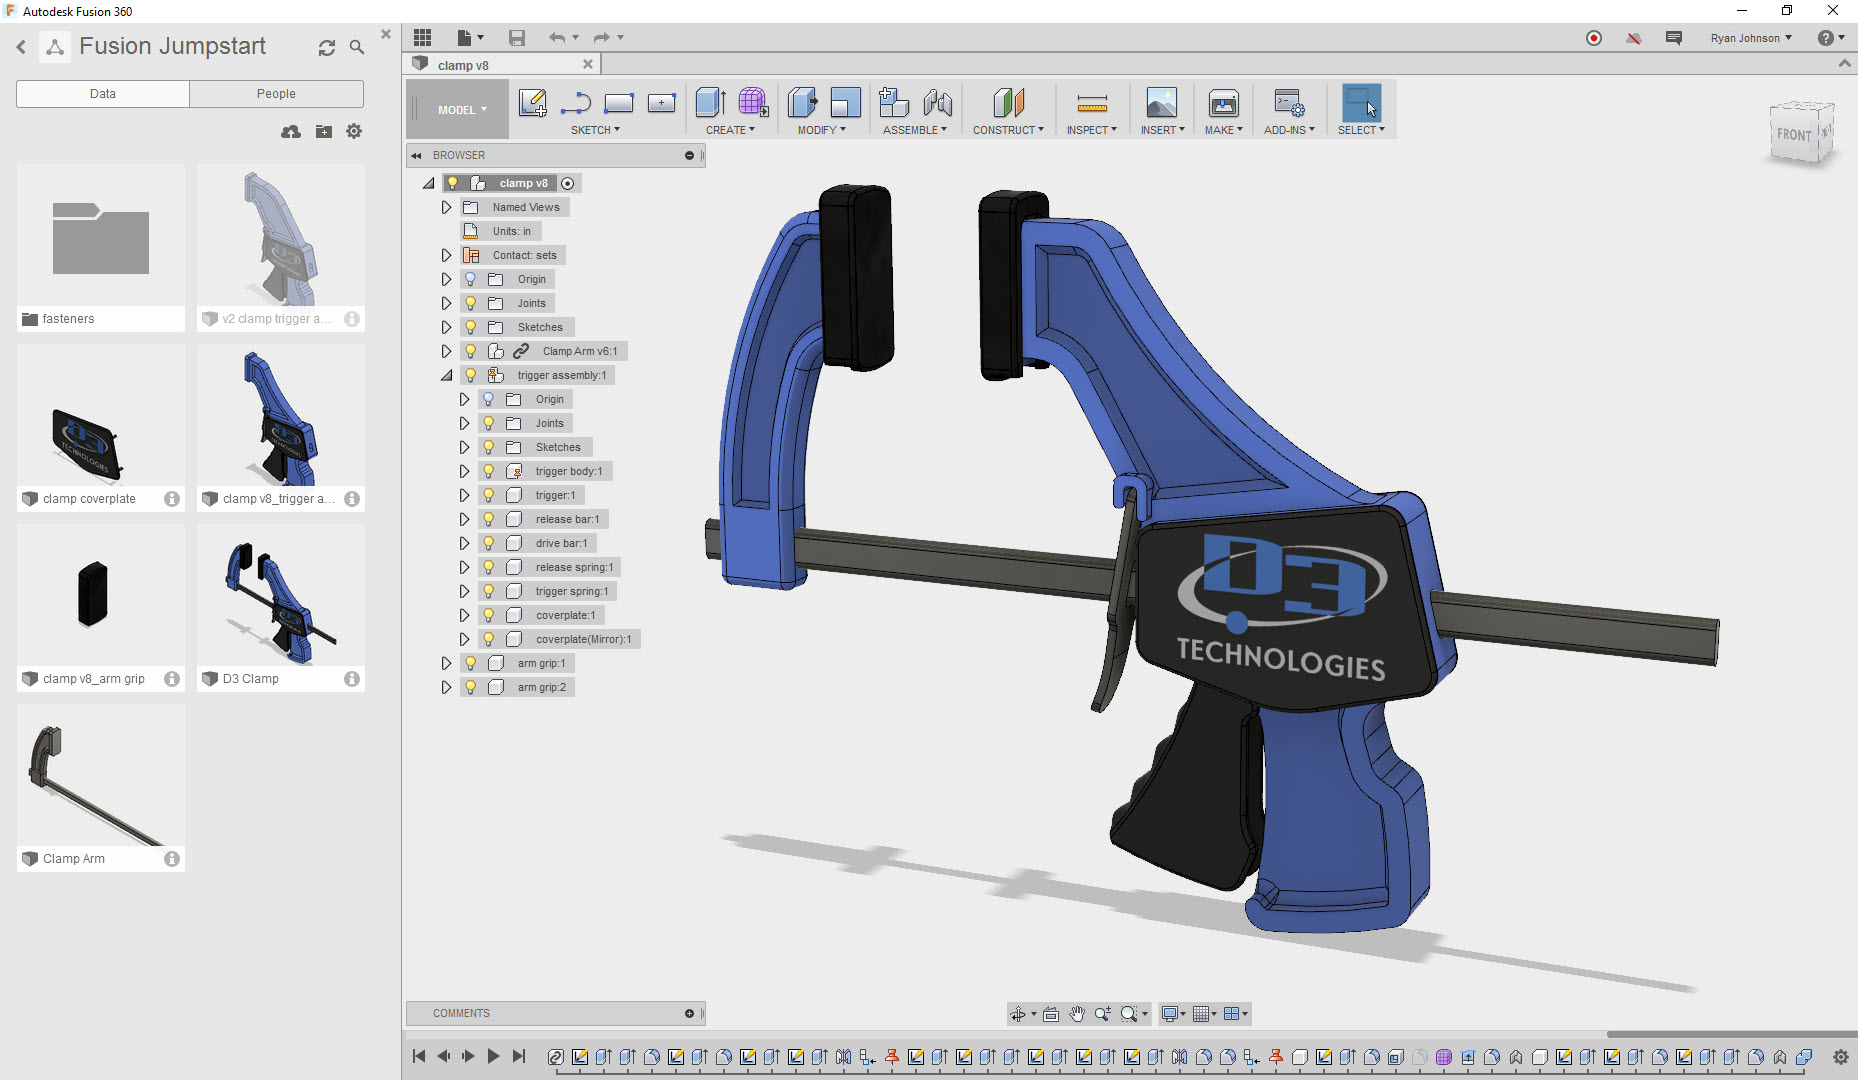 Autodesk Fusion 360 clamp rendering being stored in the cloud